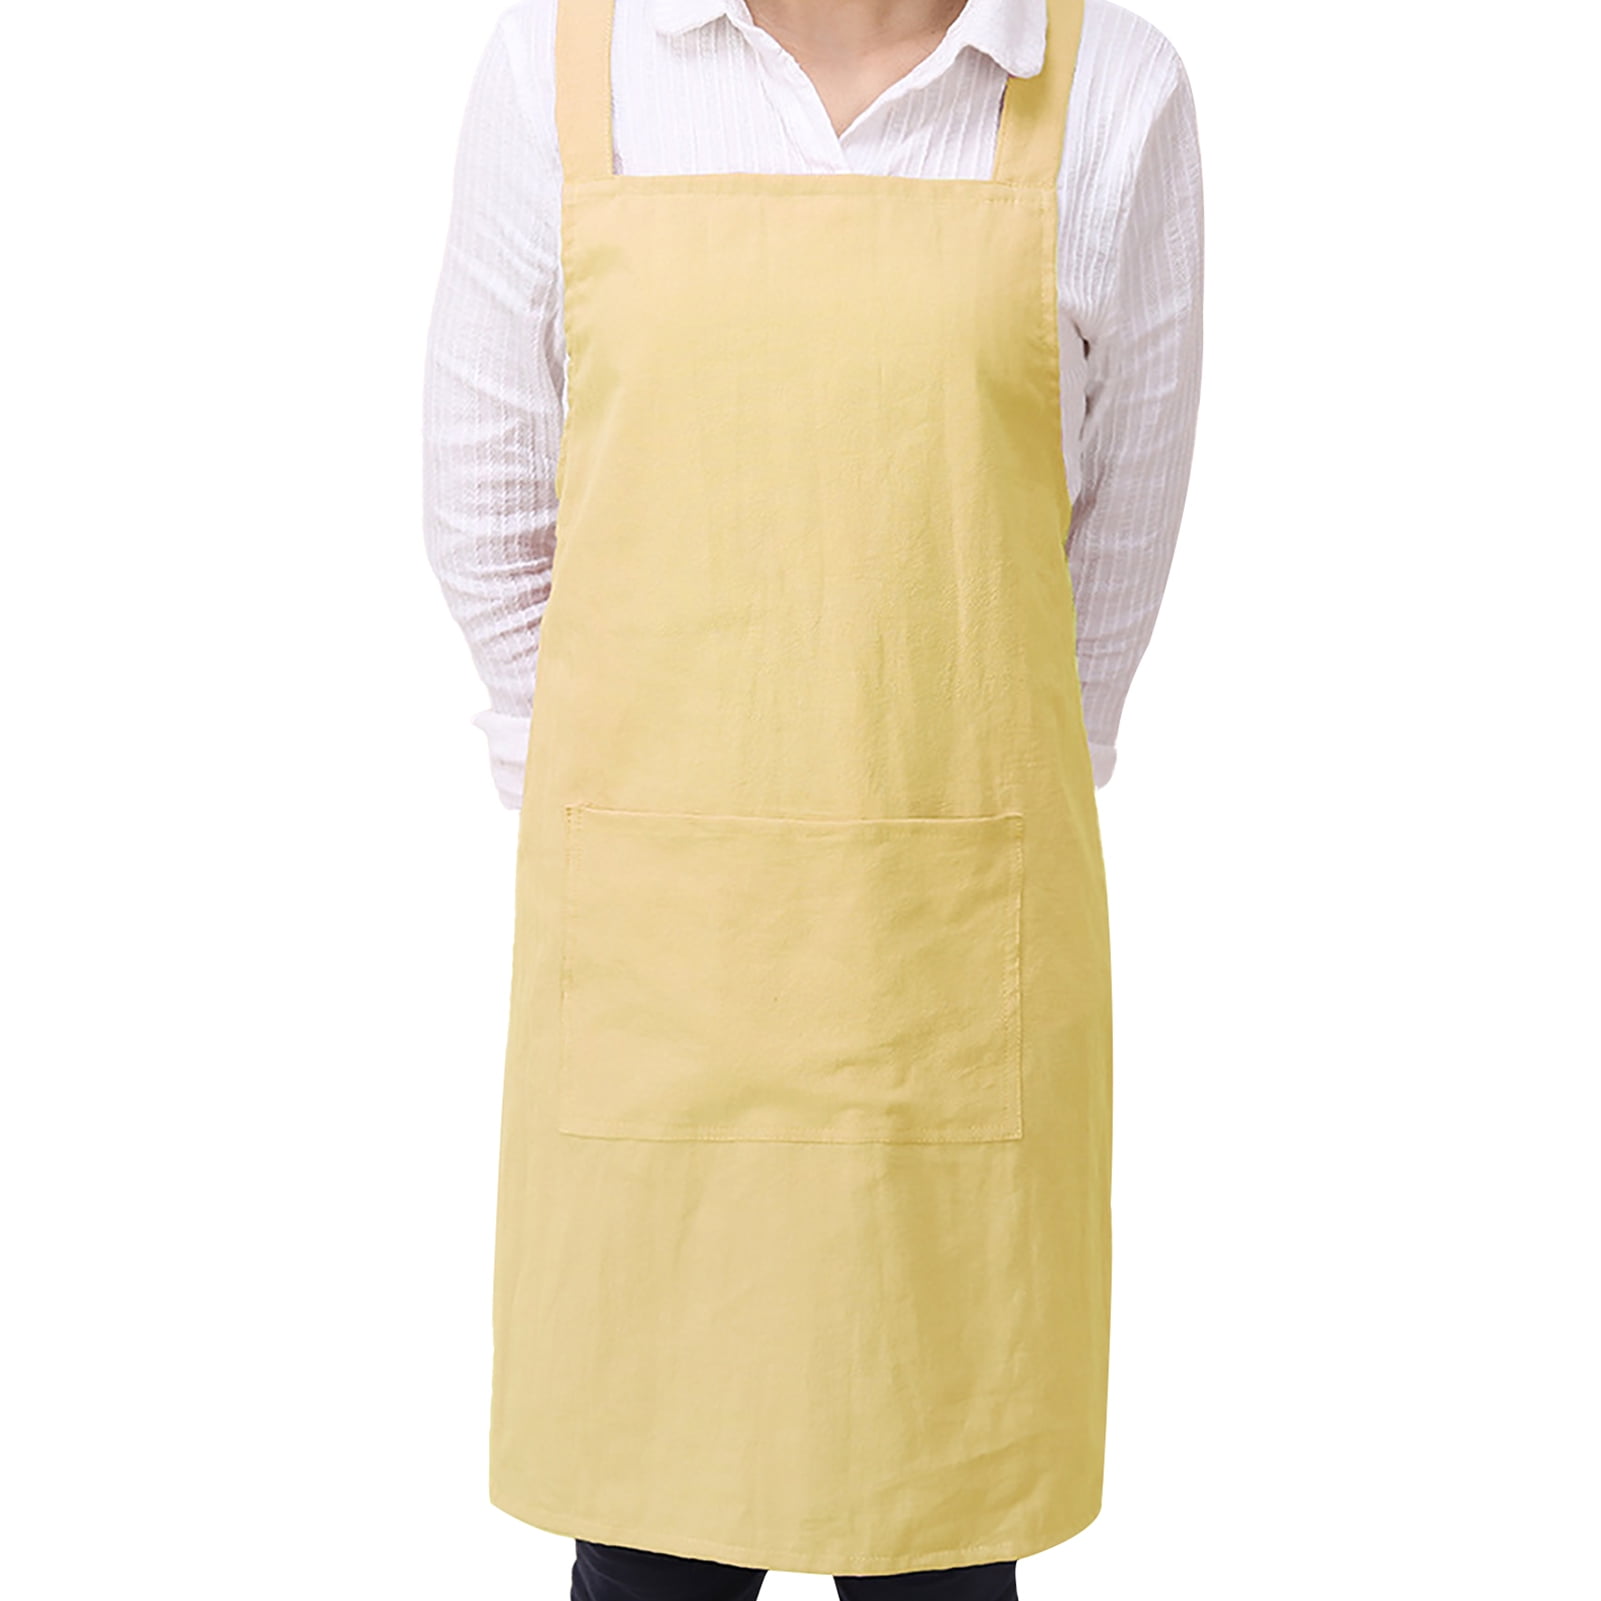 Adults Leather Strip Fastened Bib Apron Unisex Chef Bar Cooking Work Wear Apron 